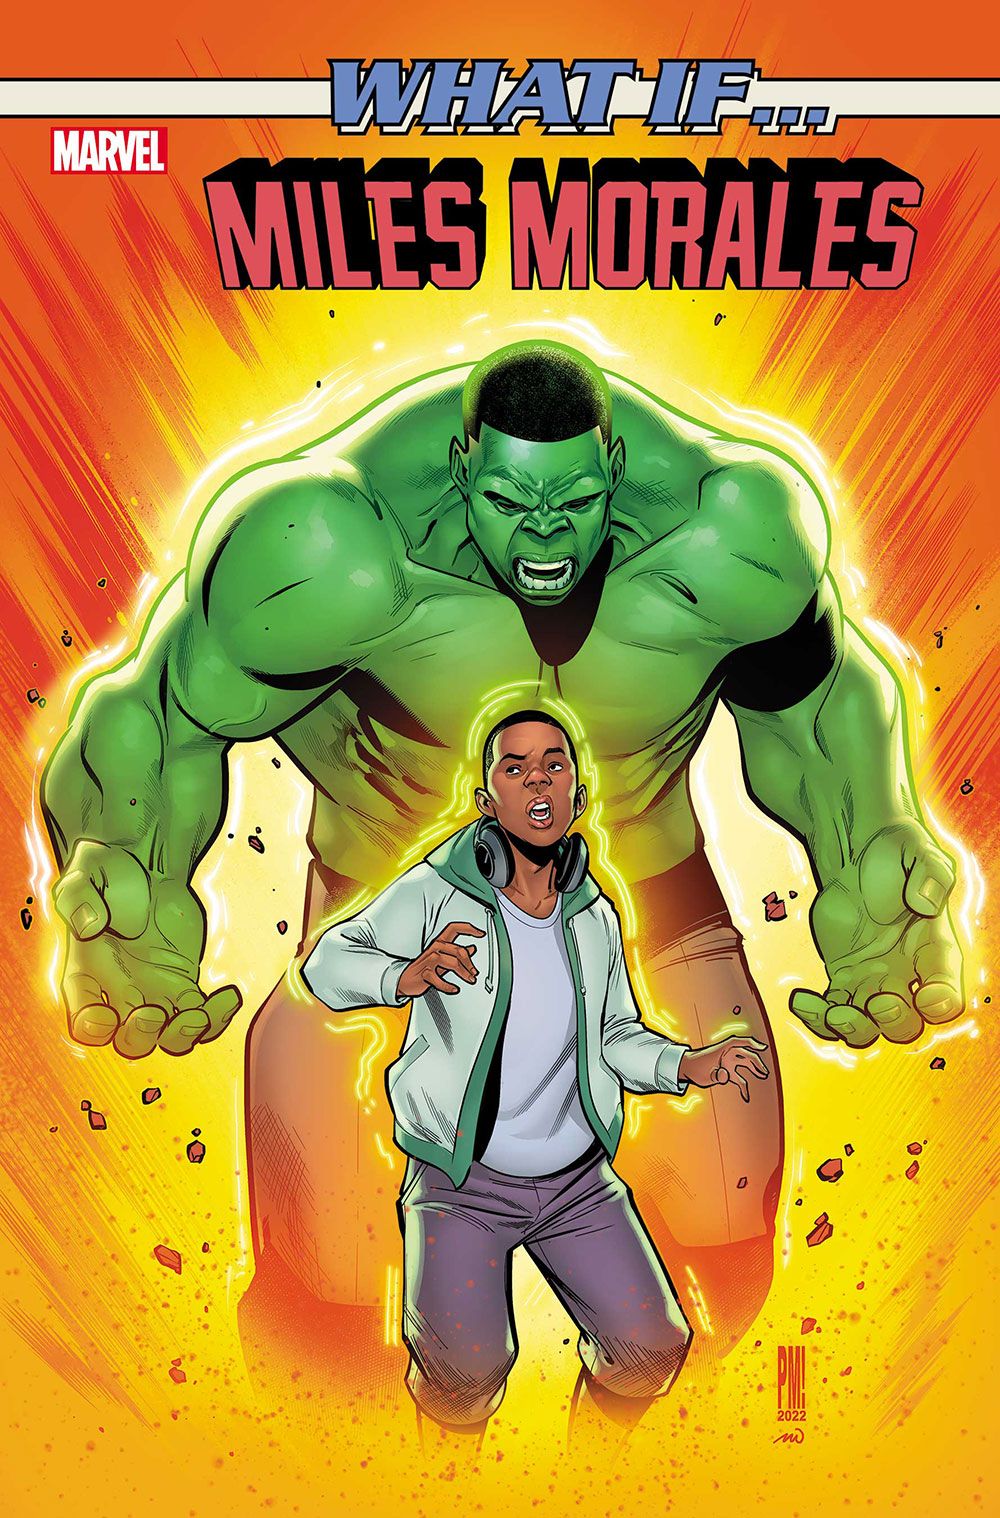 Thor and Hulk Start Their Biggest Fight Ever In This Weeks Marvel Releases